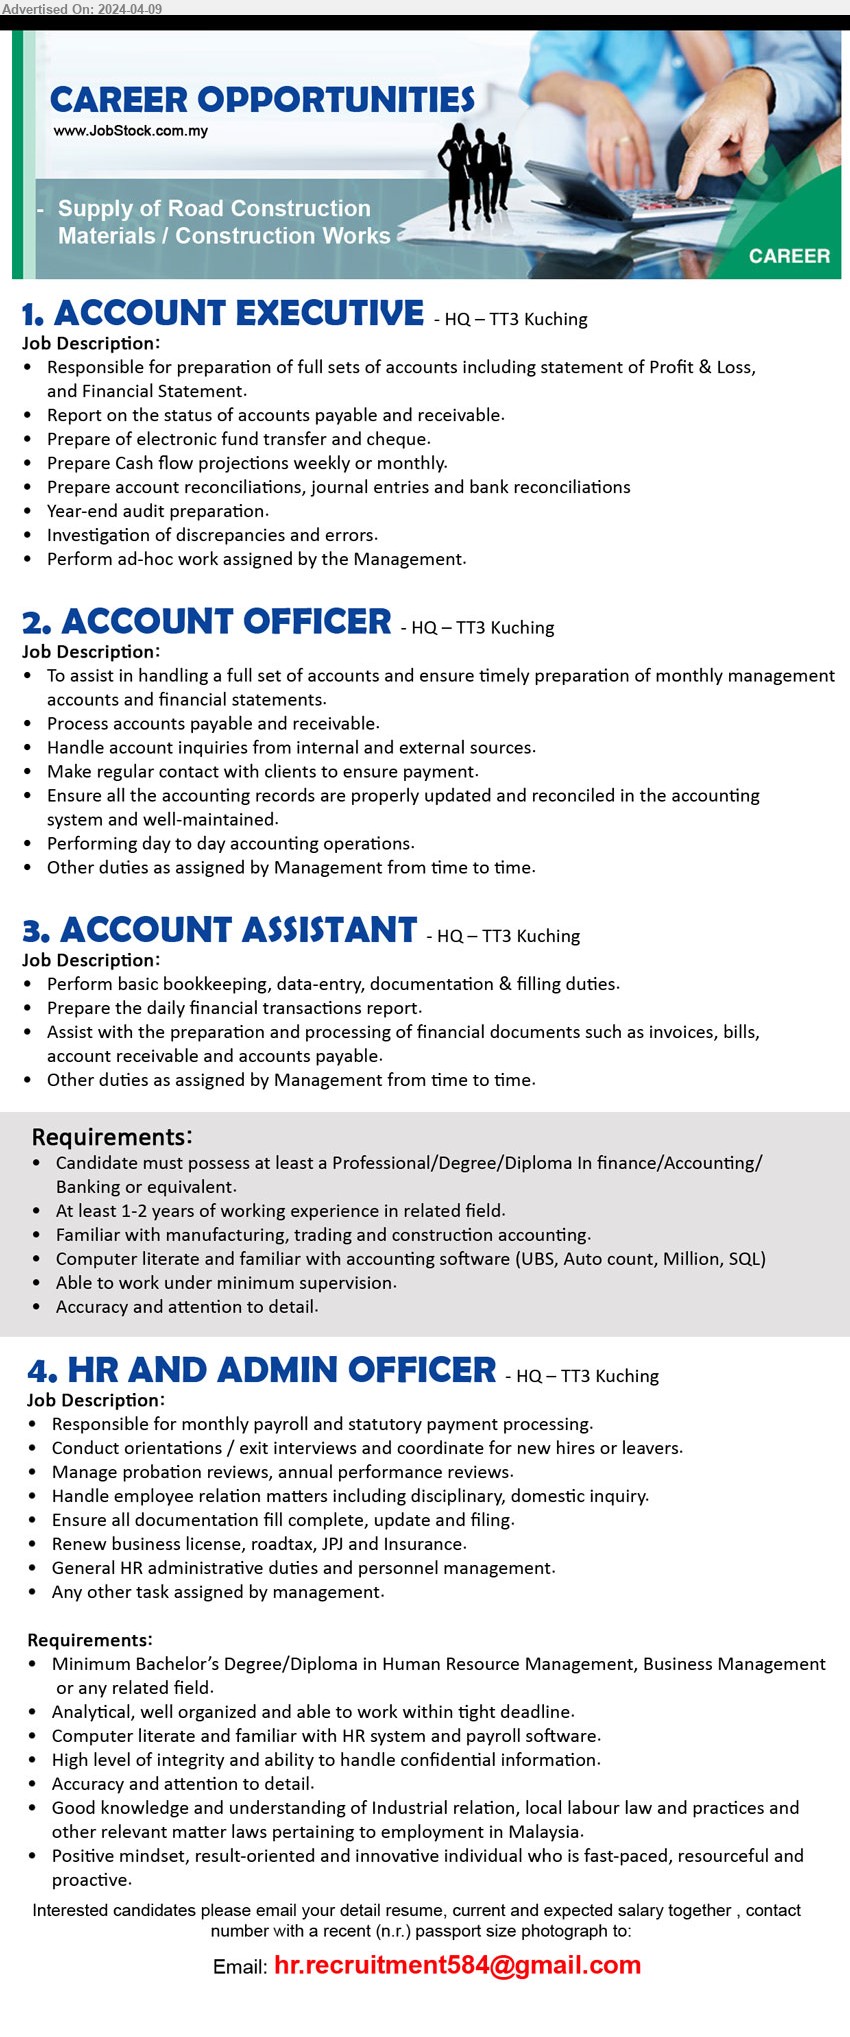 ADVERTISER (Supply of Road Construction  Materials / Construction Works) - 1. ACCOUNT EXECUTIVE (Kuching).
2. ACCOUNT OFFICER (Kuching).
3. ACCOUNT ASSISTANT (Kuching).
Requirement (post 1 - 3):  Professional/Degree/Diploma In finance/Accounting/Banking, 1-2 yrs. exp., Familiar with manufacturing, trading and construction accounting, ...
4. HR AND ADMIN OFFICER (Kuching), Bachelor’s Degree/Diploma in Human Resource Management, Business Management,...
Email resume to ....